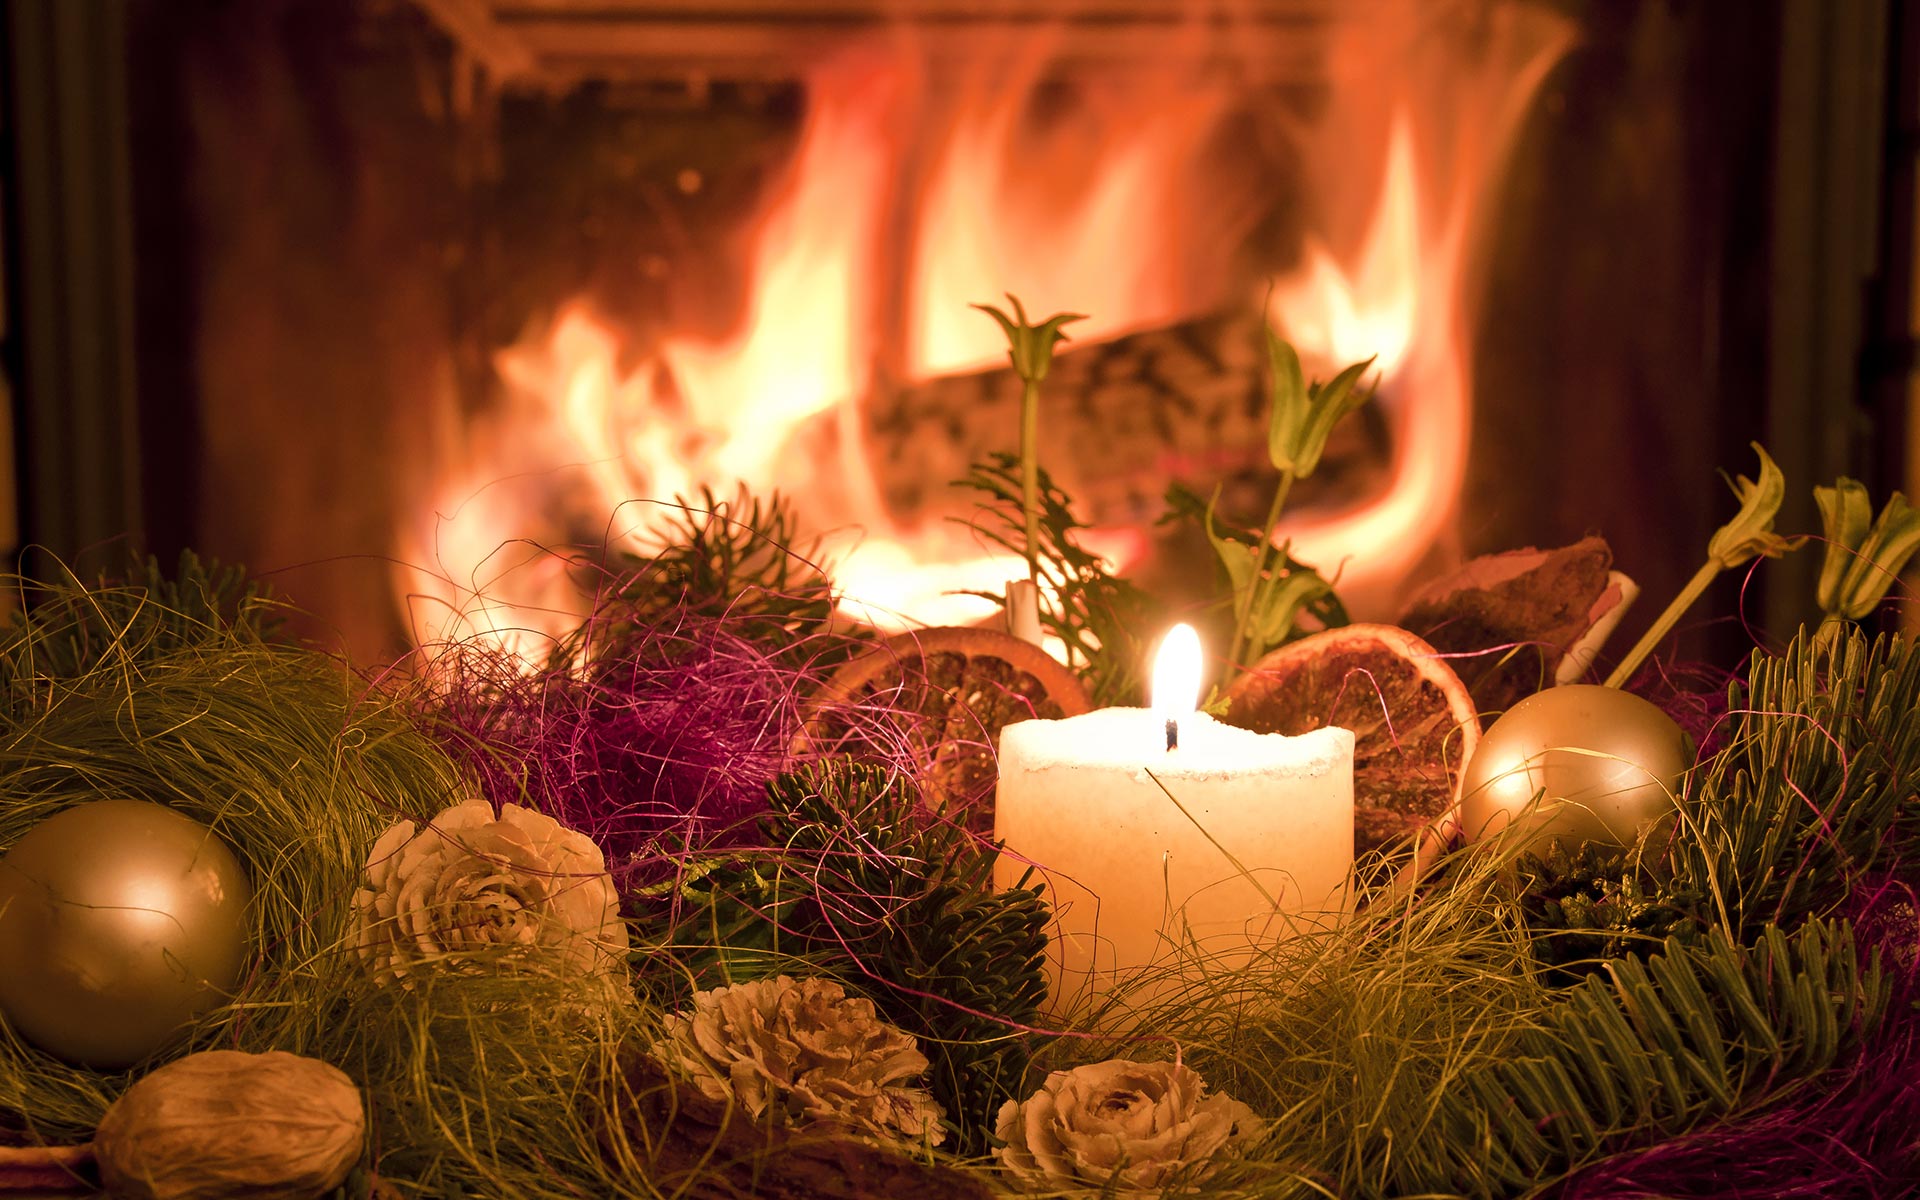 Fireplace Hd Wallpapers - Christmas Decoration Mantle - HD Wallpaper 